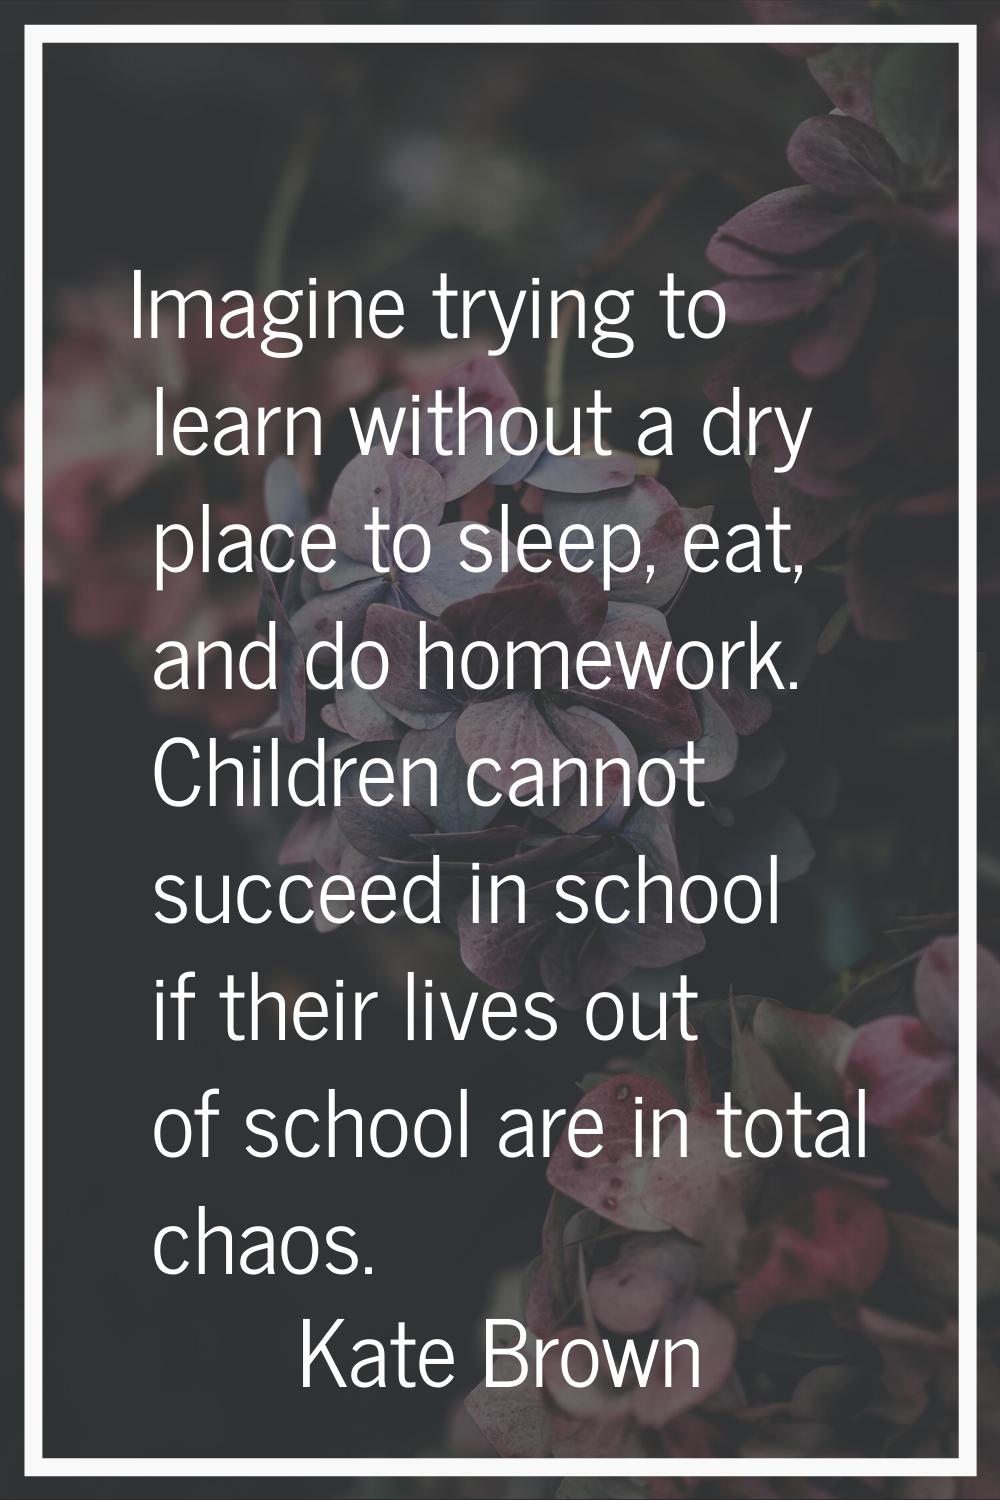 Imagine trying to learn without a dry place to sleep, eat, and do homework. Children cannot succeed